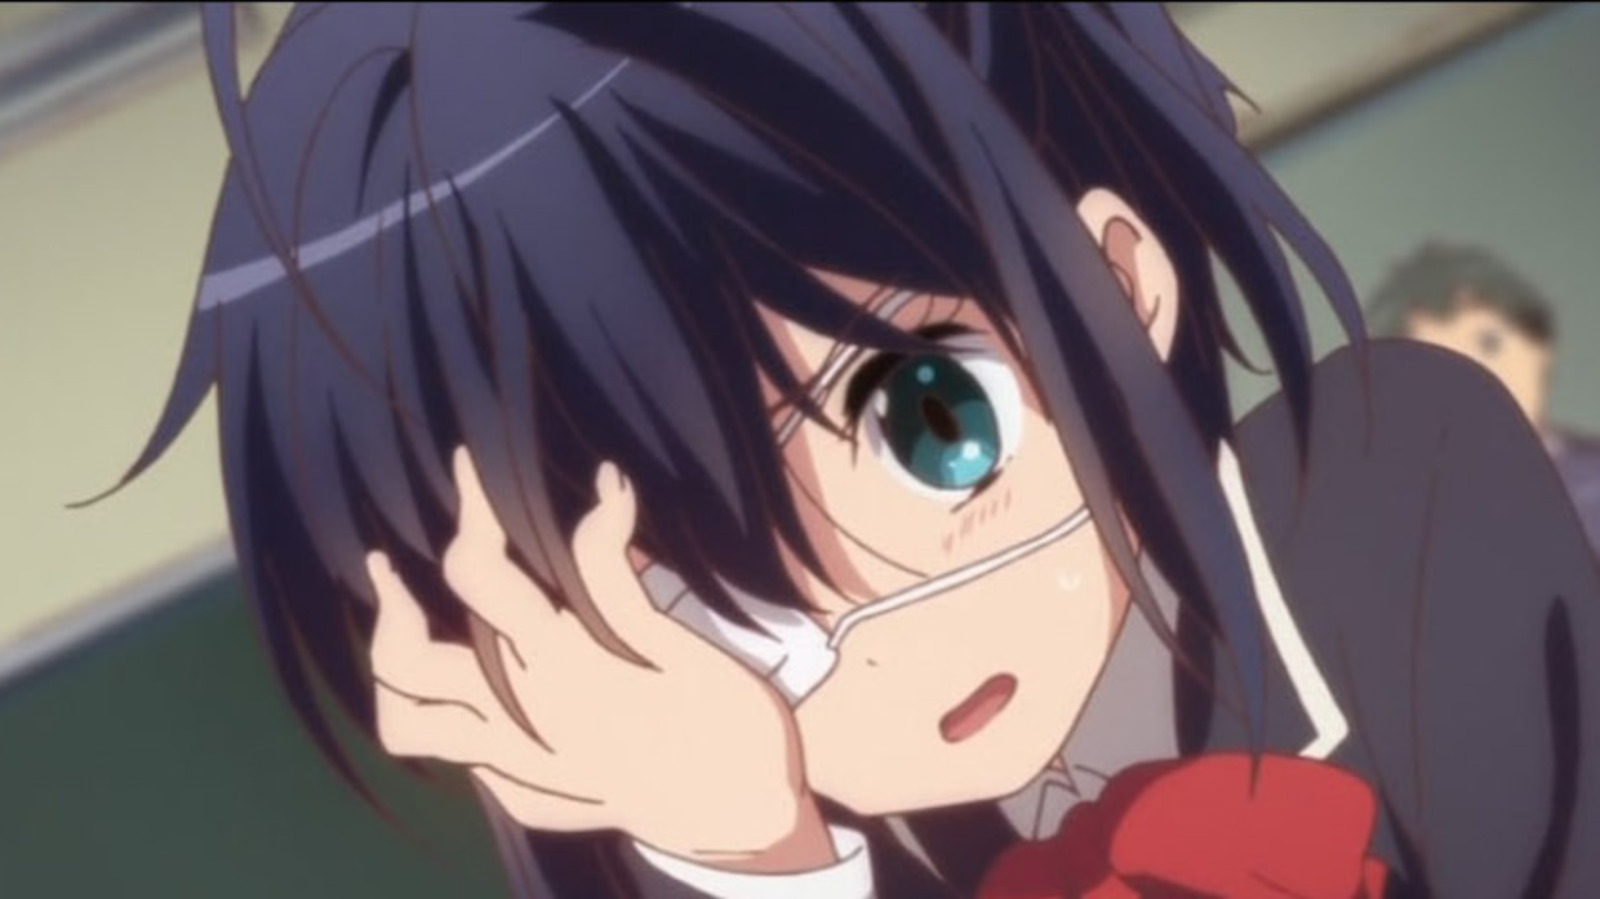  Review for Love, Chunibyo and Other Delusions